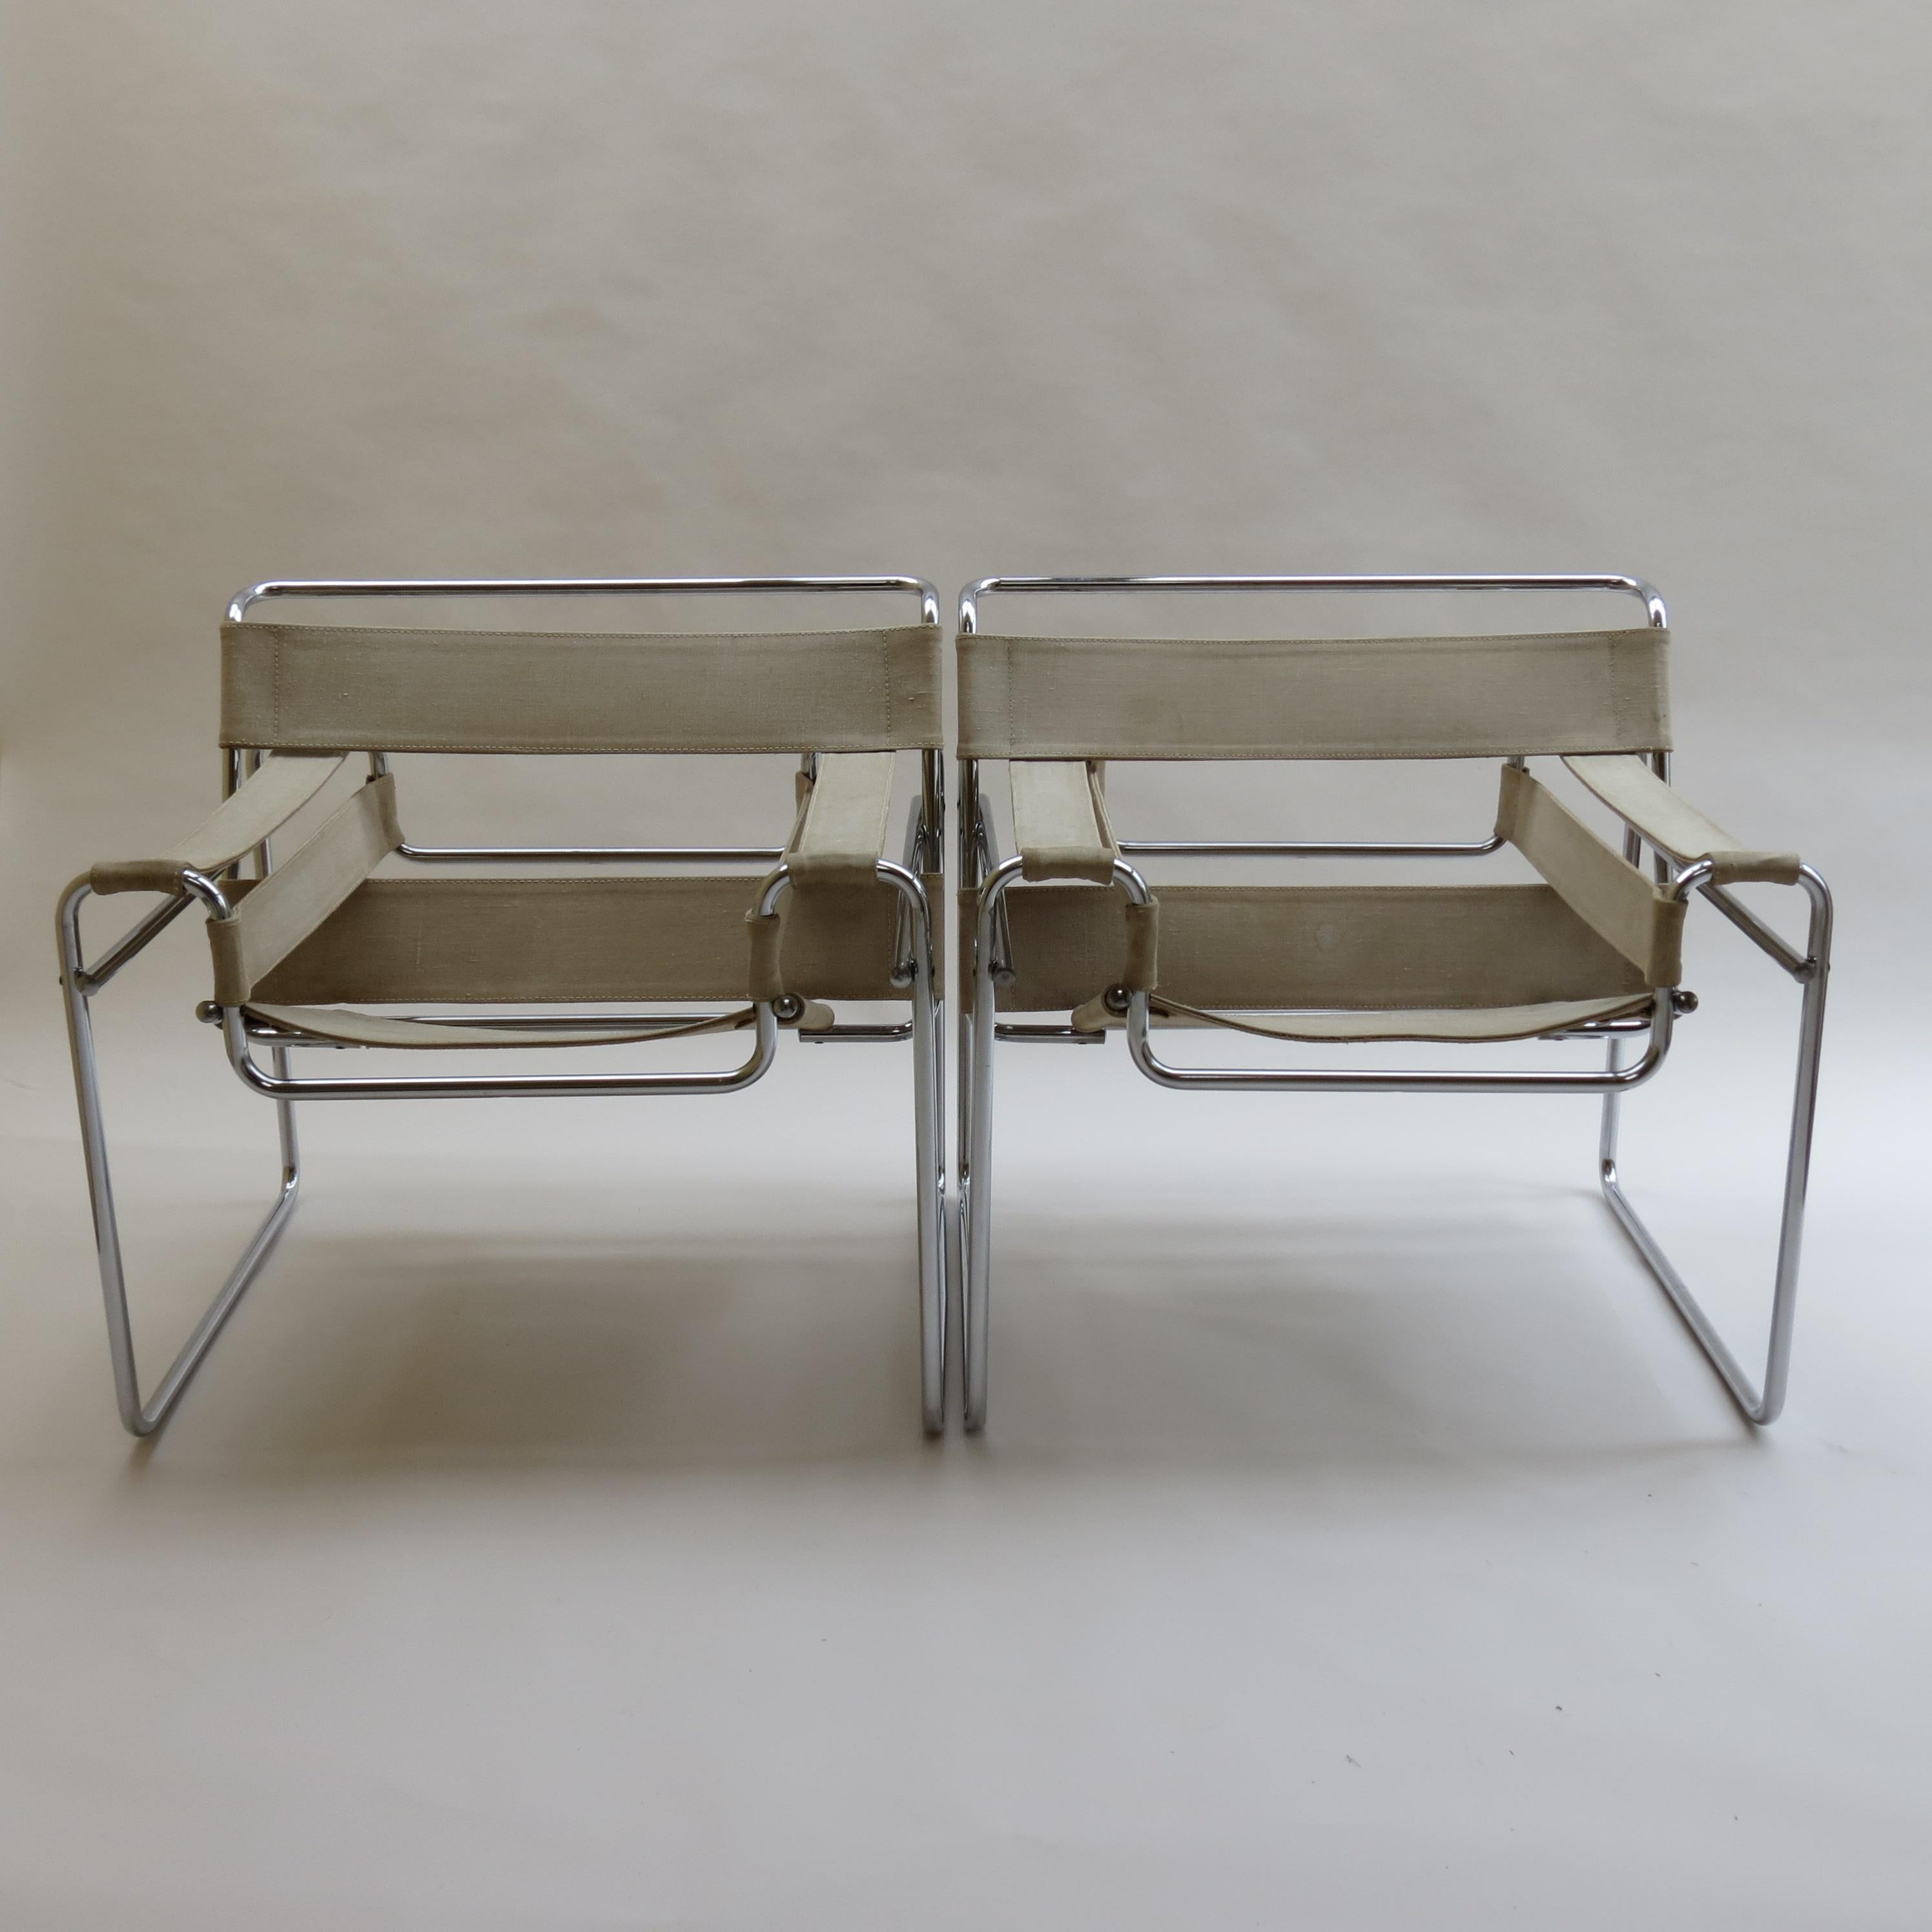 Wassily armchair, designed by Marcel Breuer and manufactured by Gavina, Italy in the 1960s, original year of design 1925. Gavina produced the Wassily chair under licence between 1962 and 1968, then Knoll purchased the Gavina company and took over